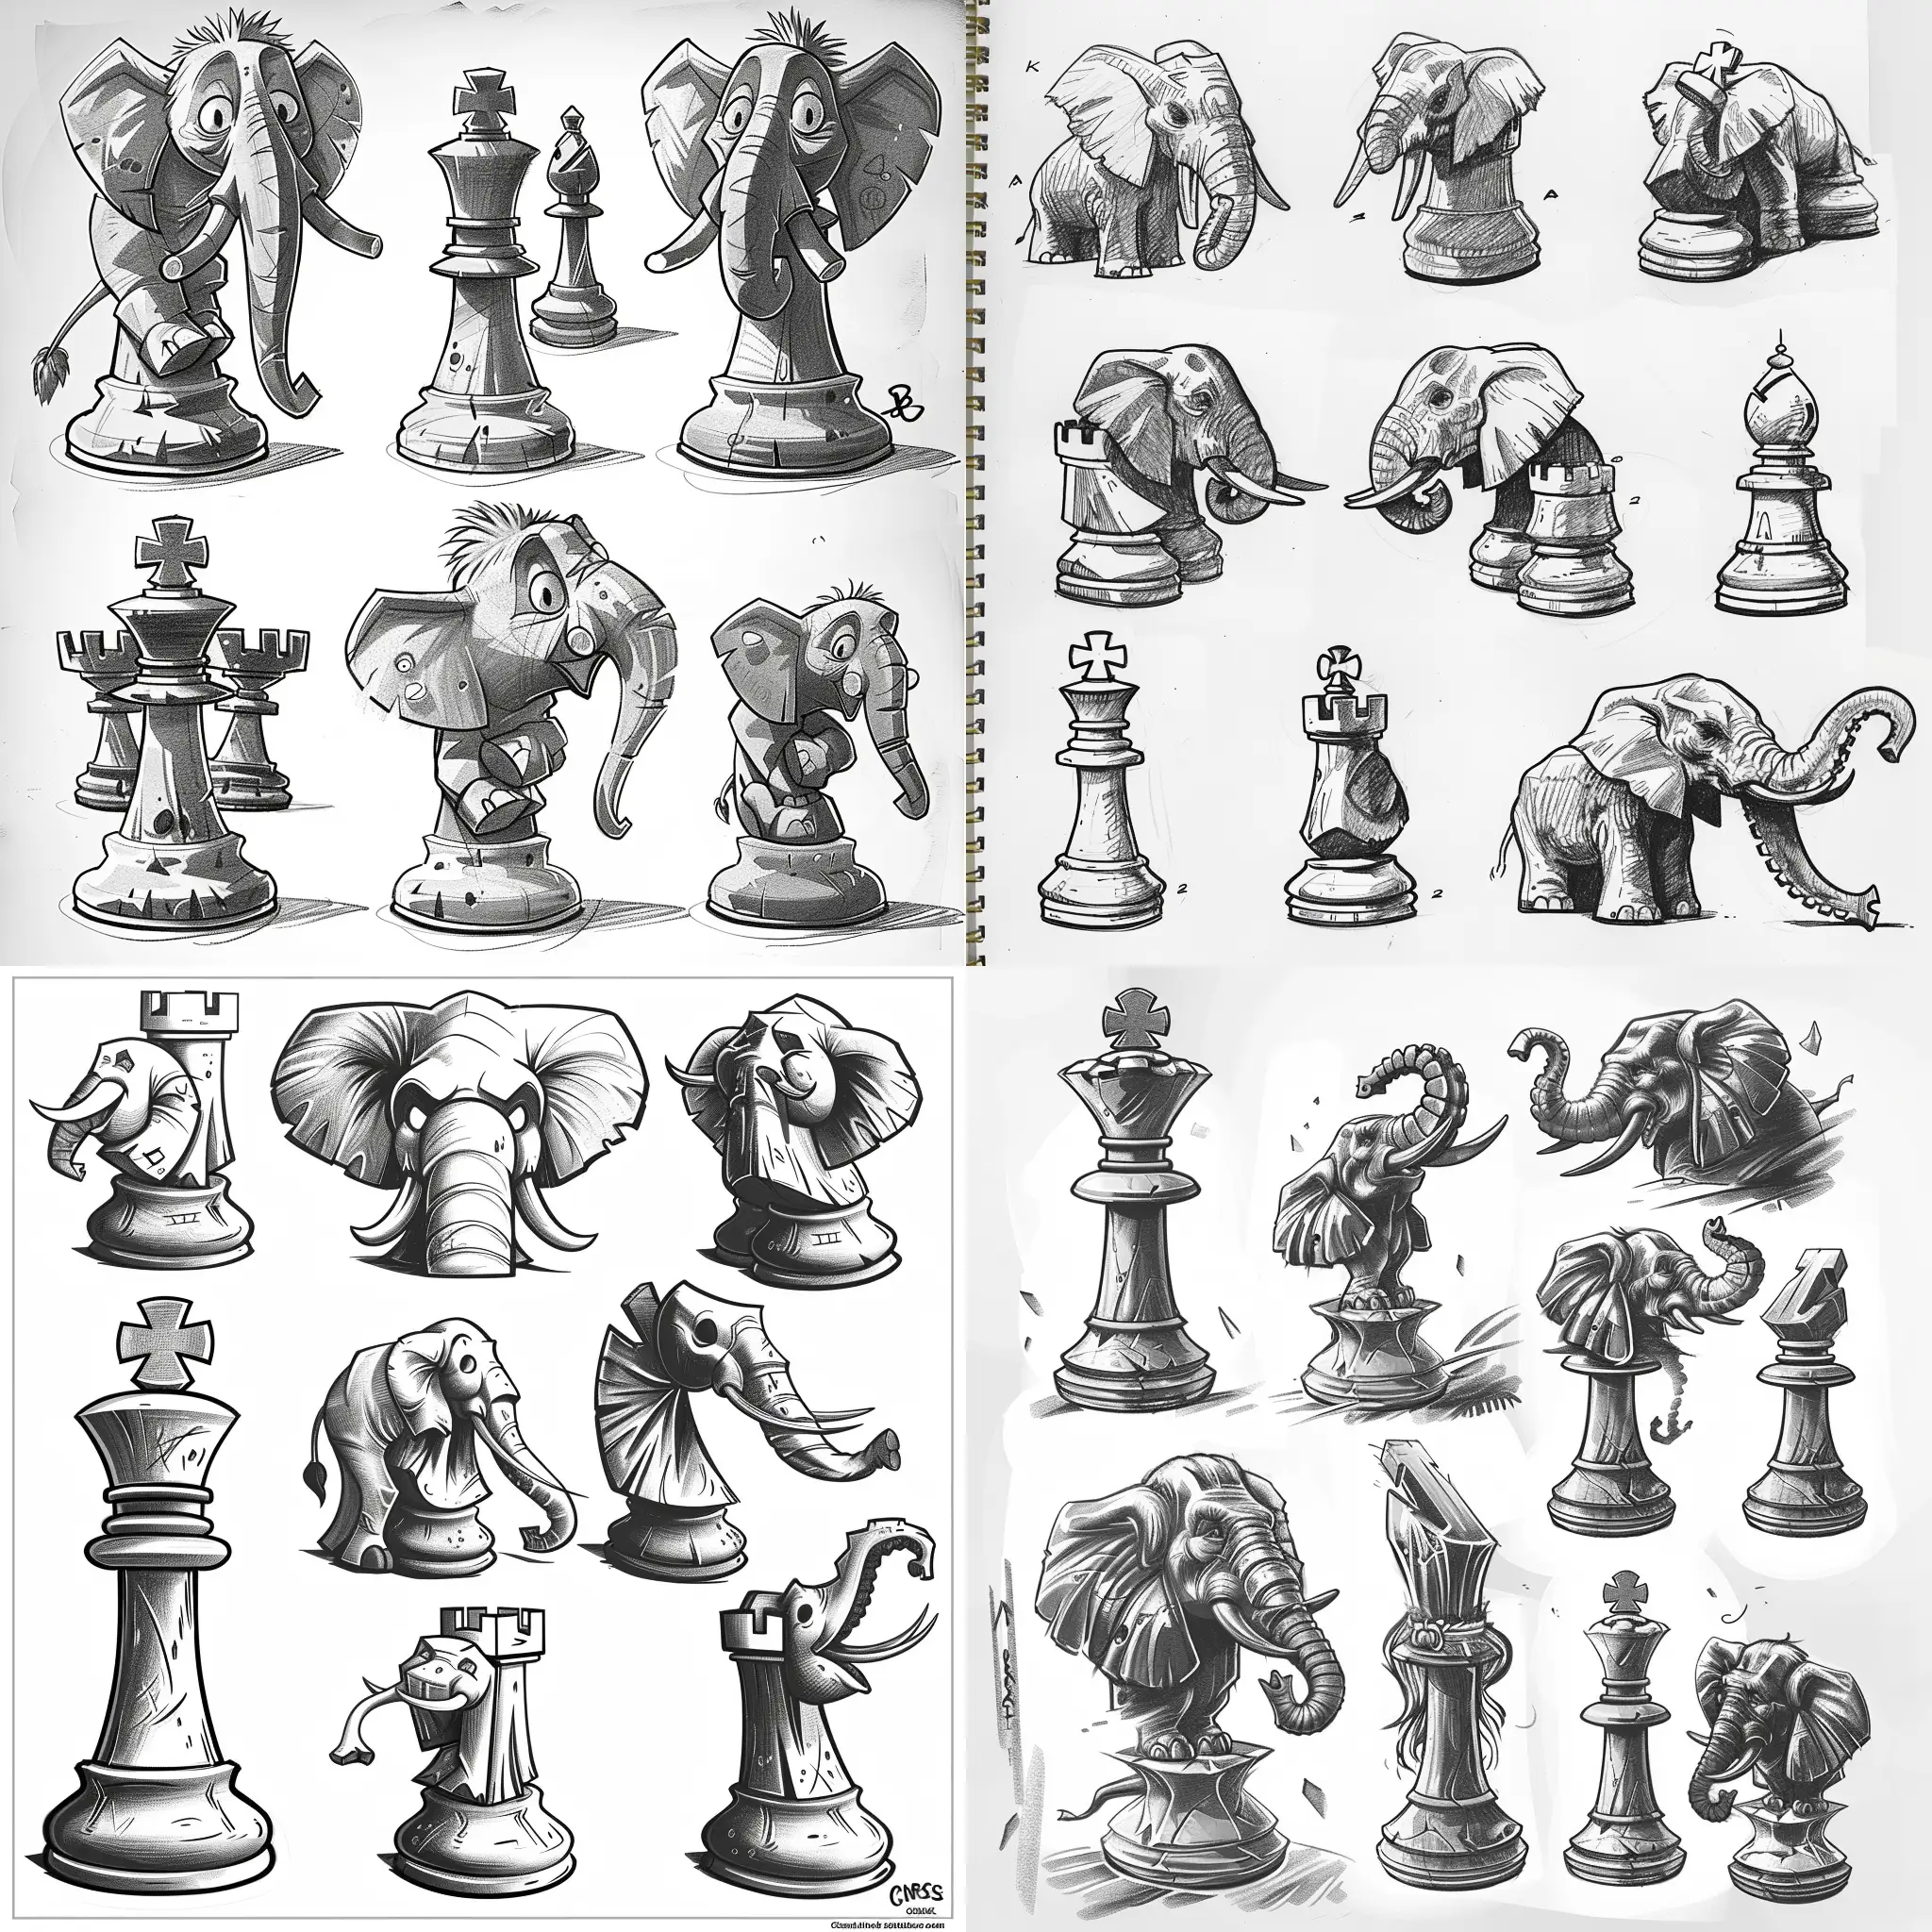 black and white basic sketch, stylised elephant character chess pieces at various angles, chris riddell style art